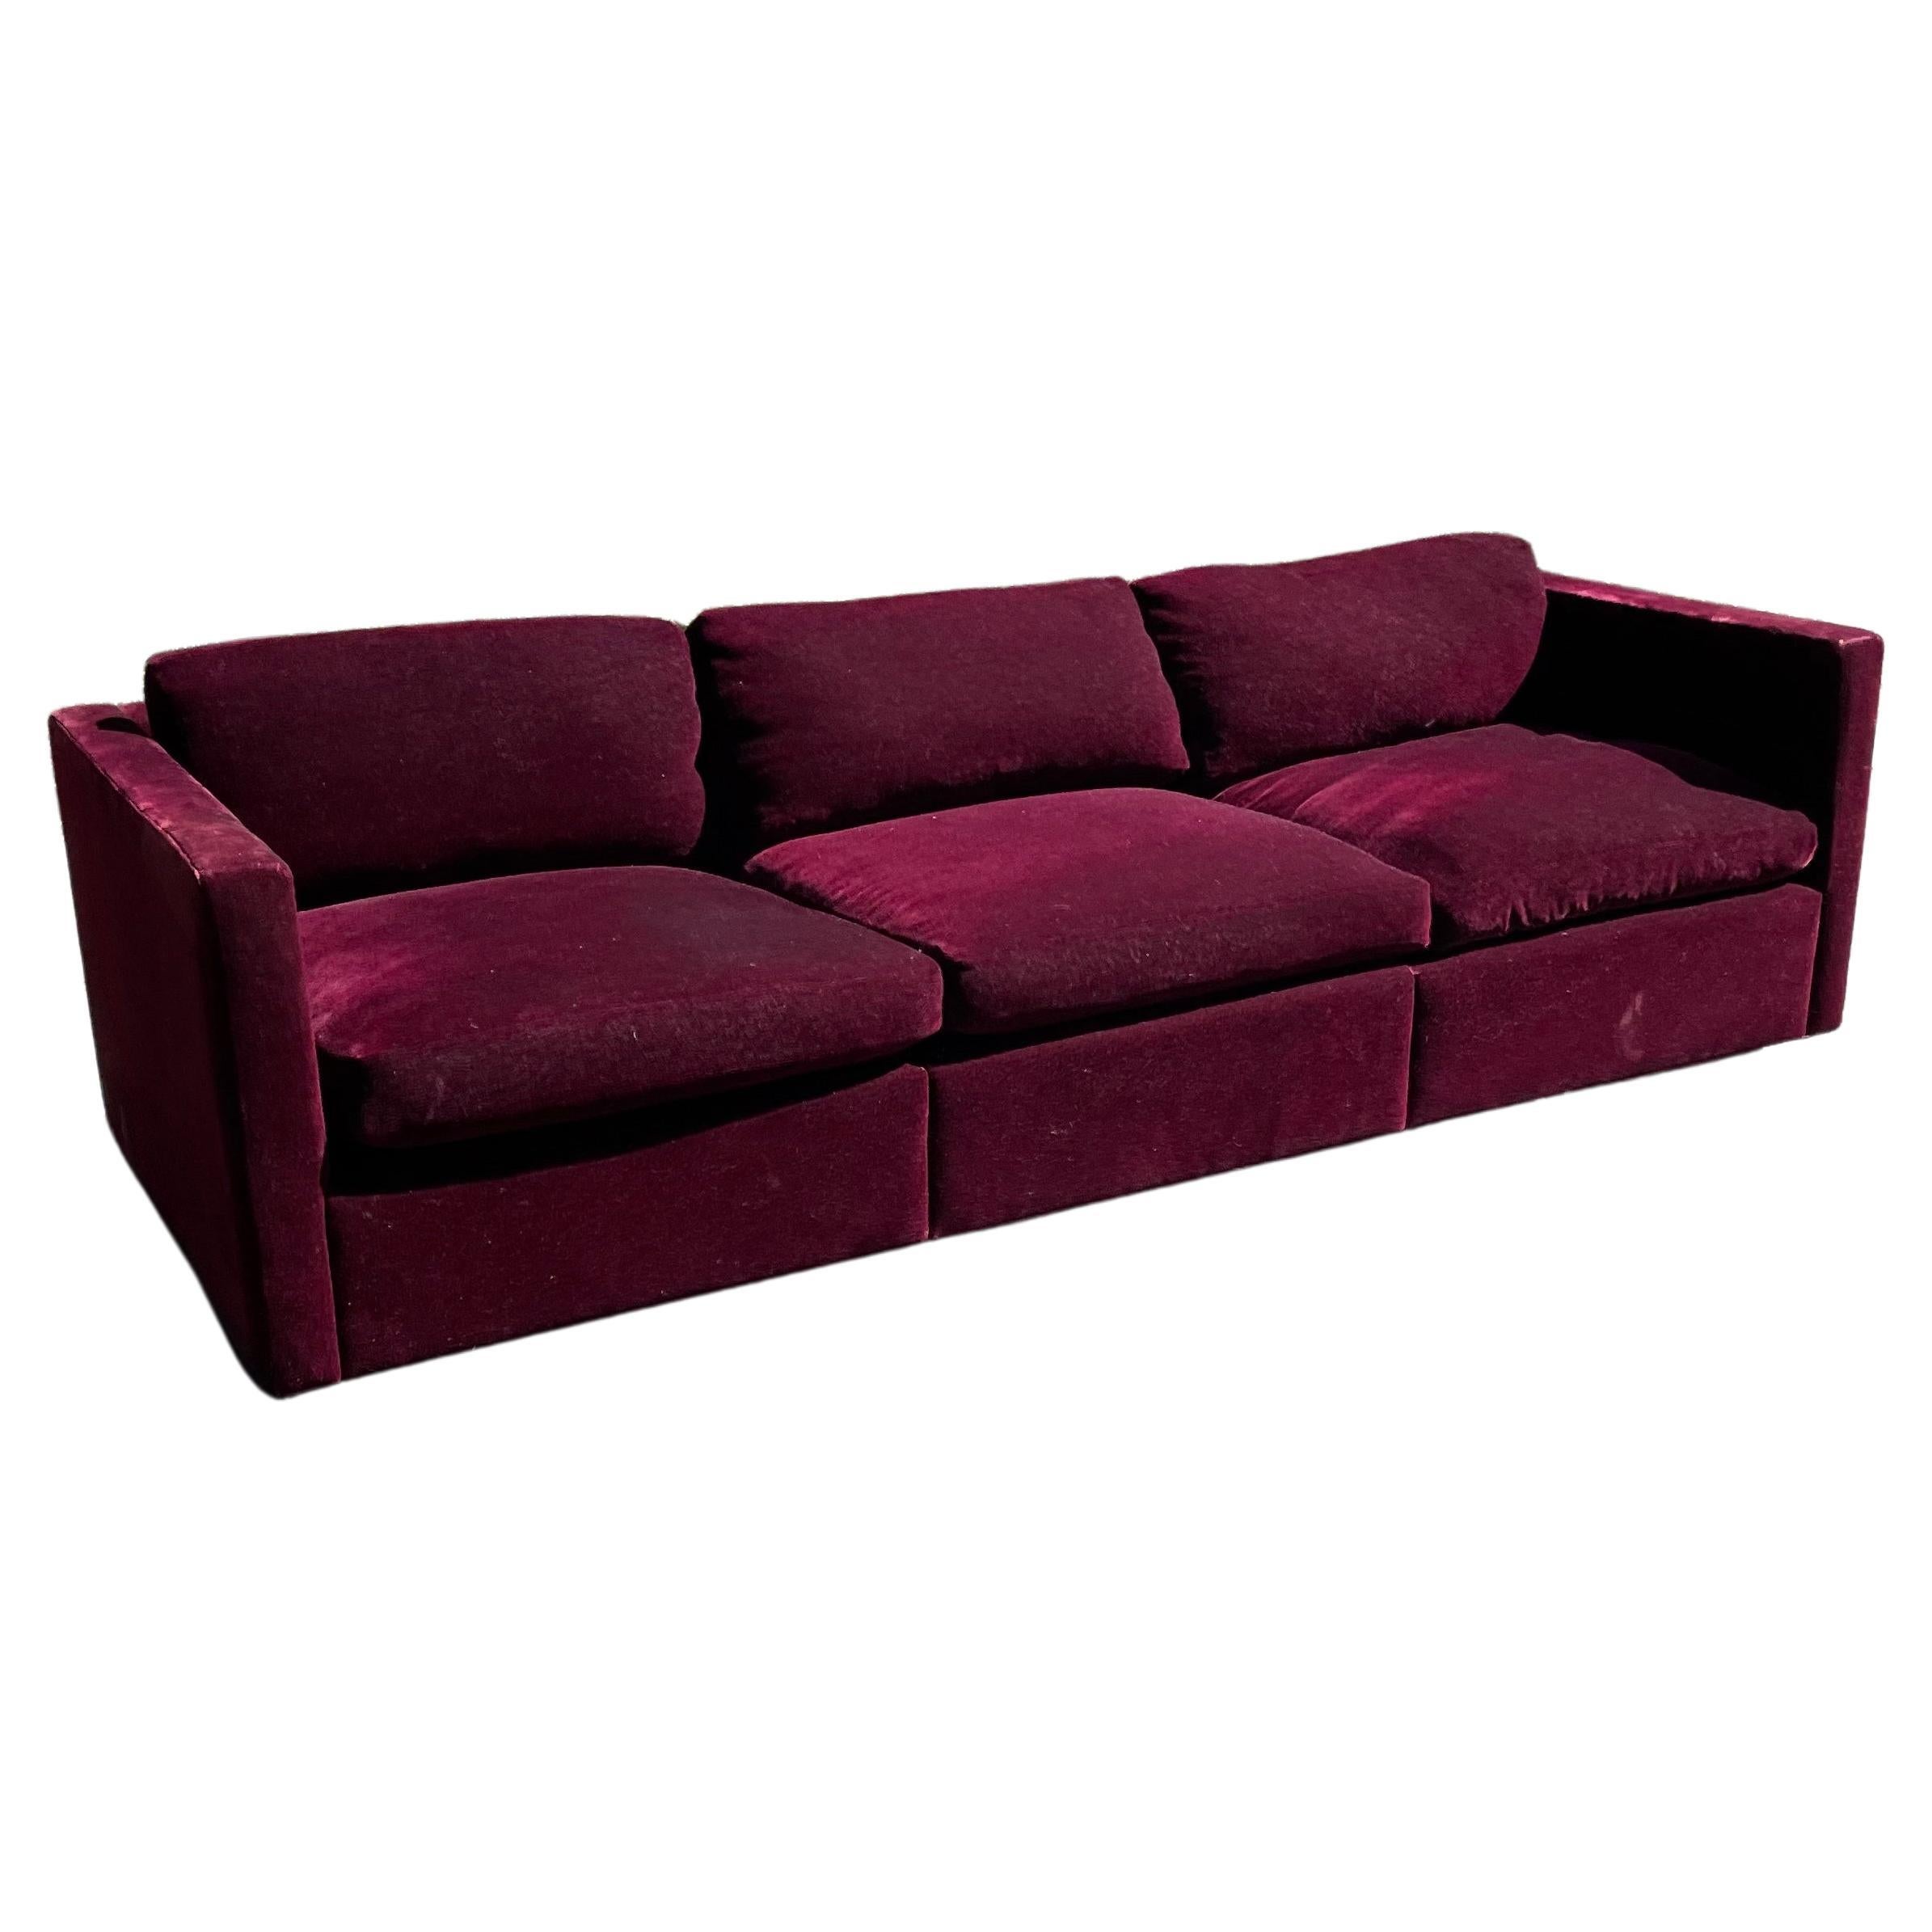 Vintage sofa designed by Charles Pfister for Knoll. USA, circa 1970s. 

Upholstered in a fabulous deep red mohair. Features down cushions and metal legs. Original upholstery shows very well. 

The sofa is very well crafted. Charles Pfister